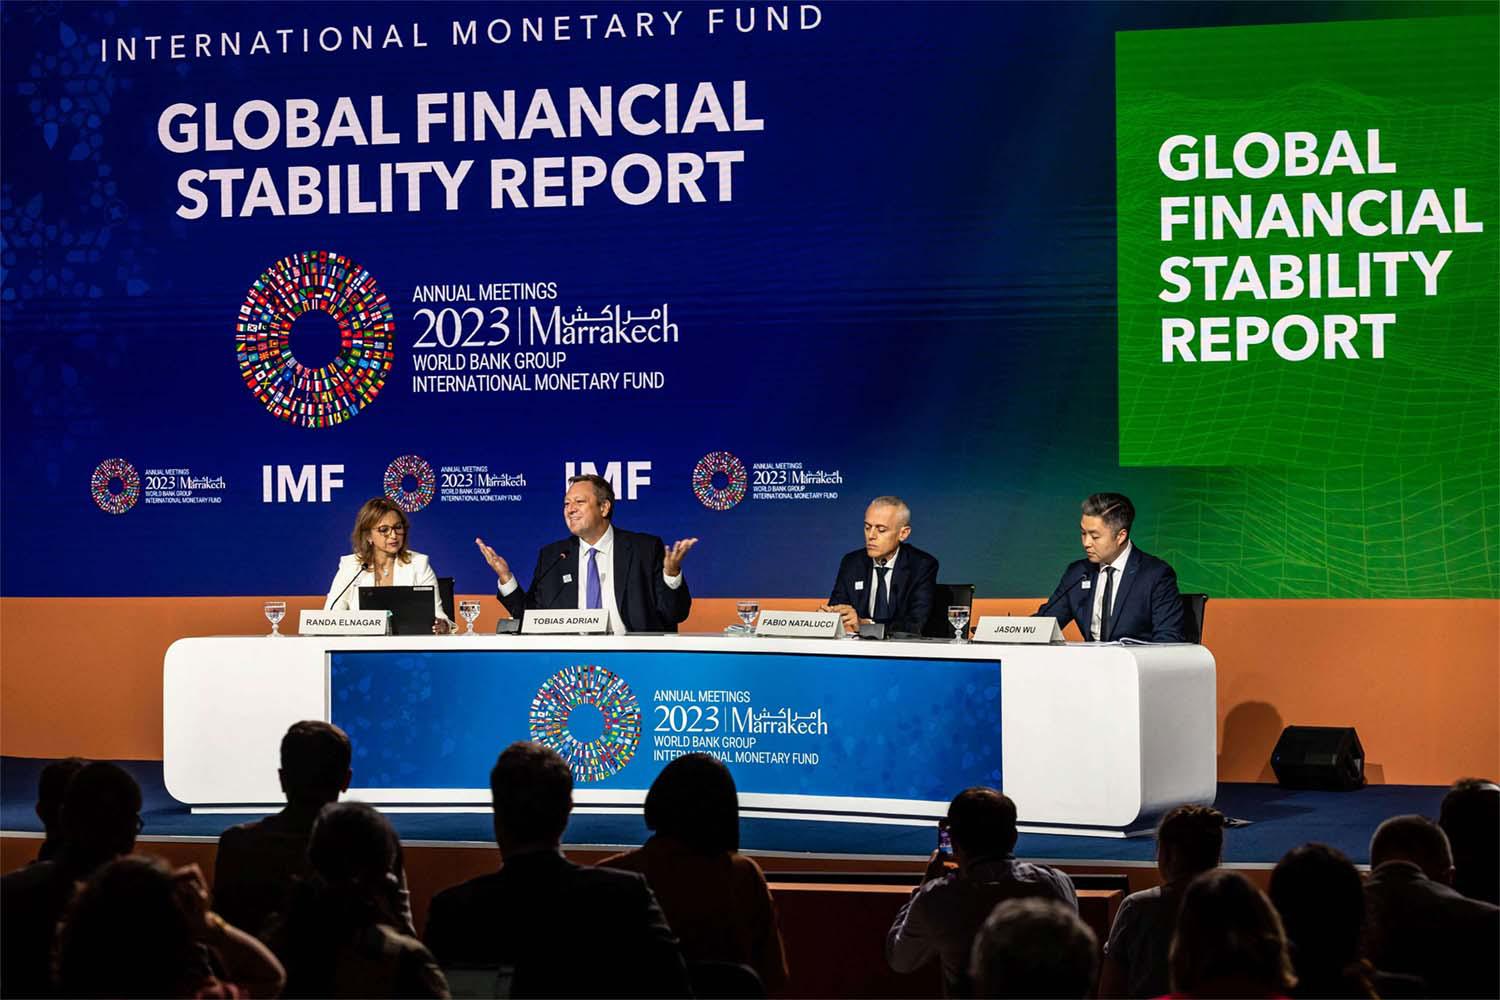 Tobias Adrian (2nd left), Financial Counsellor and Director of the Monetary and Capital Markets Department of the IMF